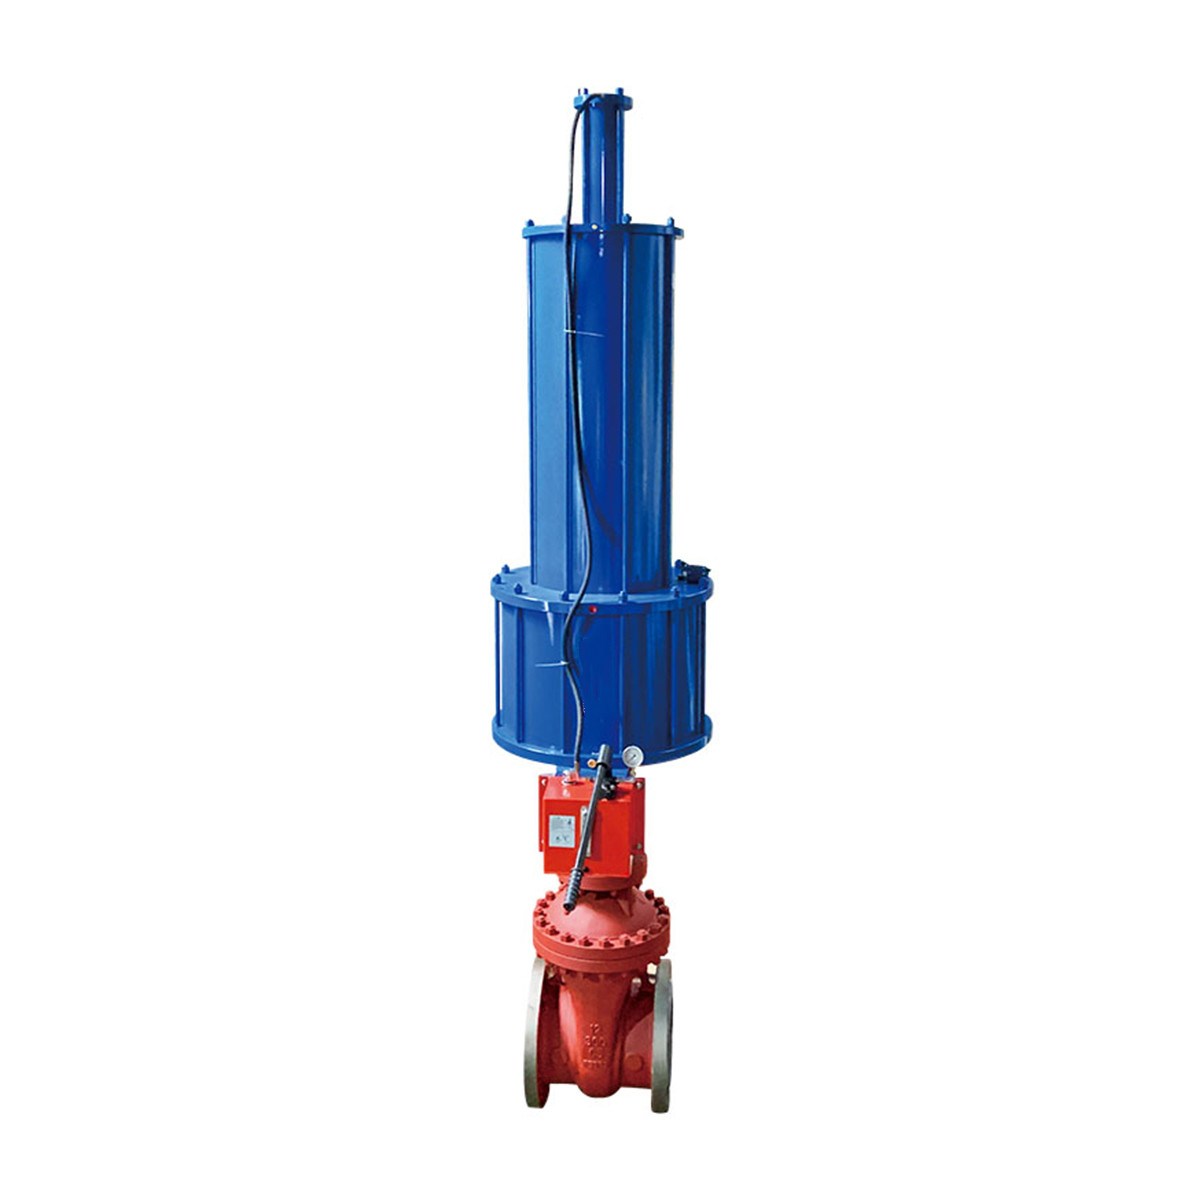 Double acting pneumatic operated gate valve